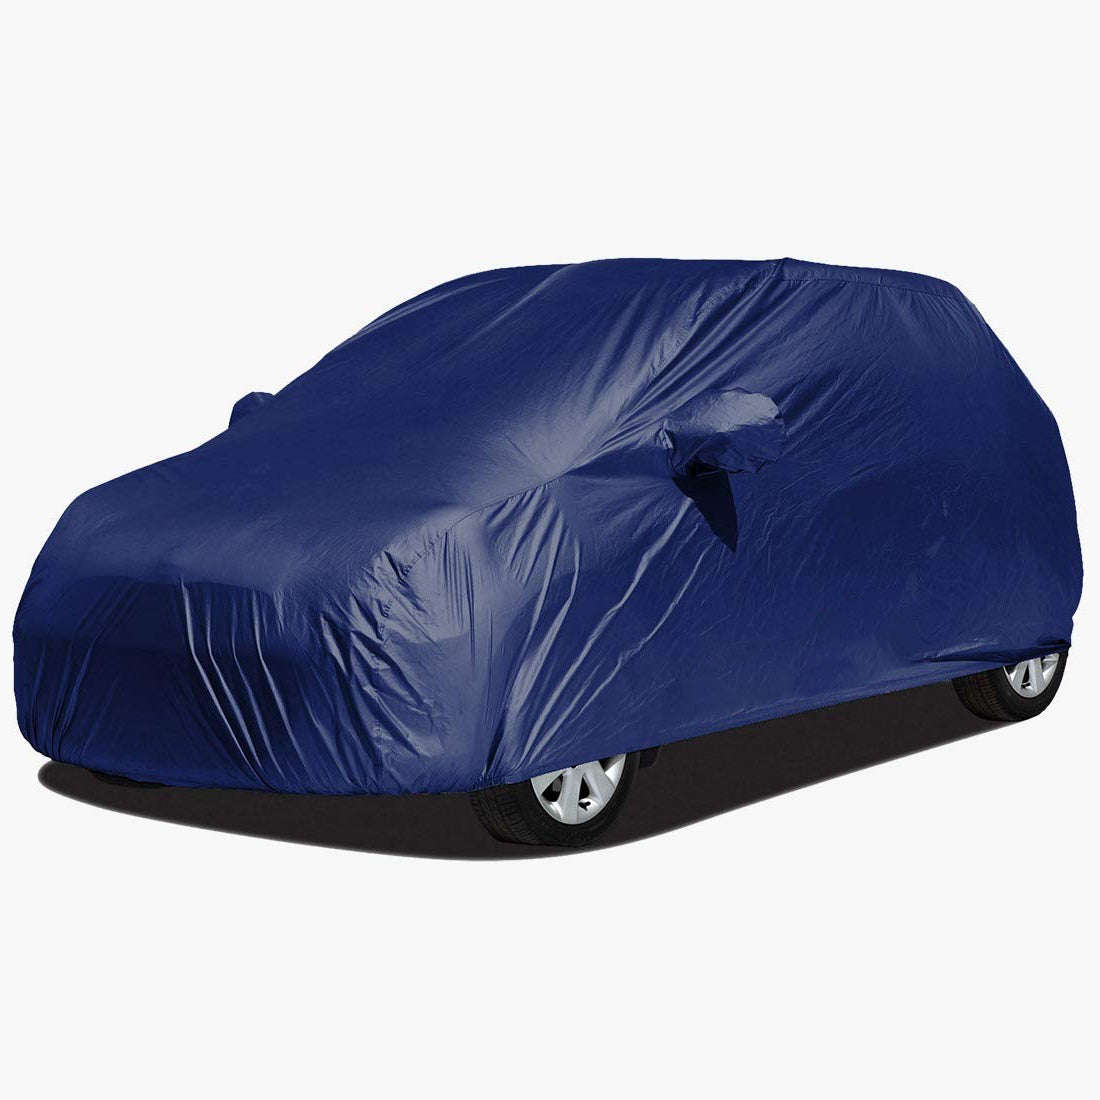 Maruti Ciaz Car Body Cover, Heat & Water Resistant, Dustproof without side mirror pockets